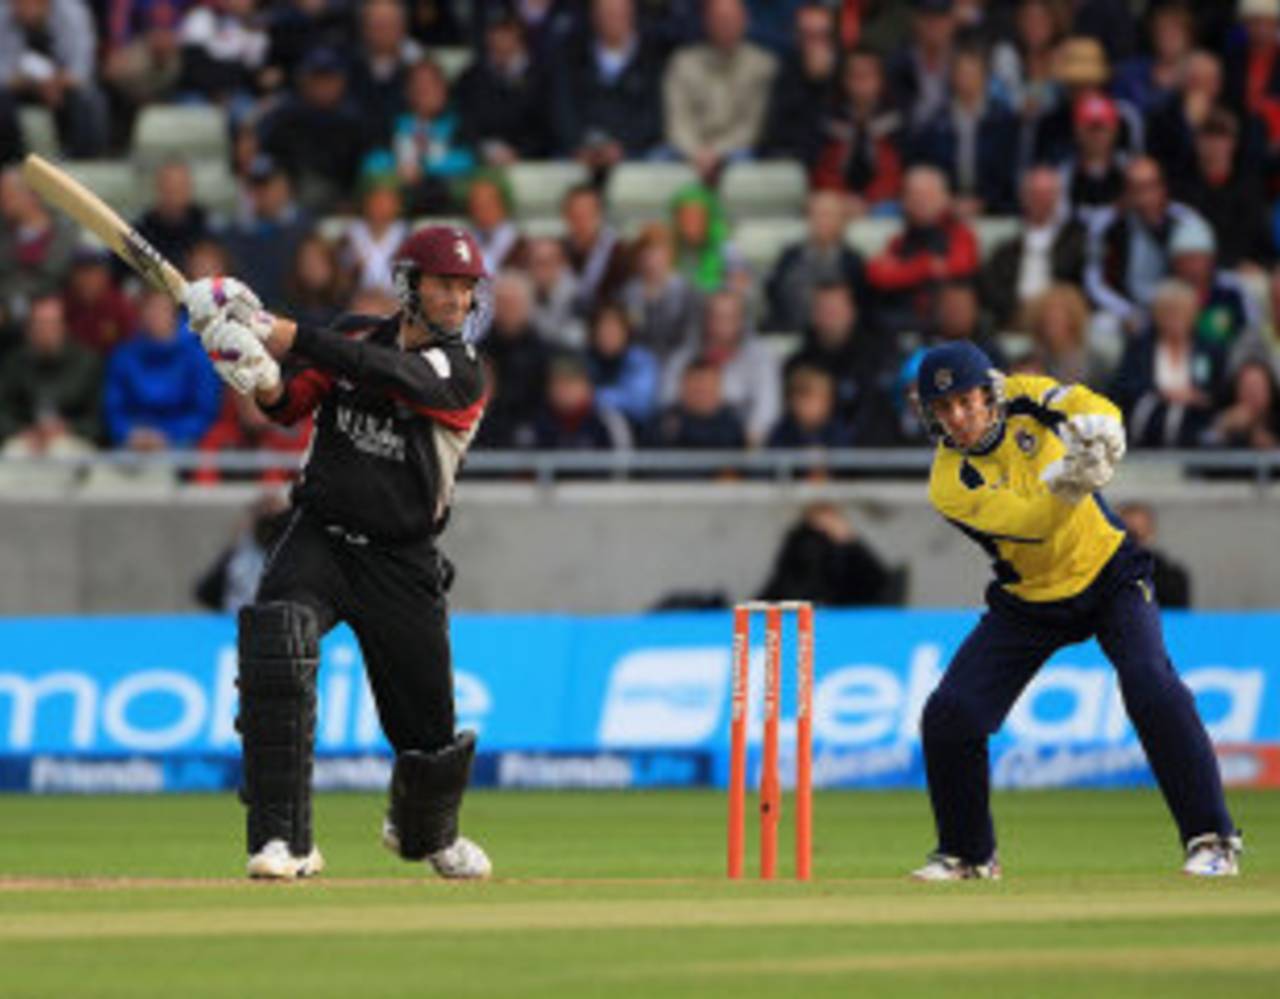 Marcus Trescothick has been immense for Somerset this season&nbsp;&nbsp;&bull;&nbsp;&nbsp;Getty Images